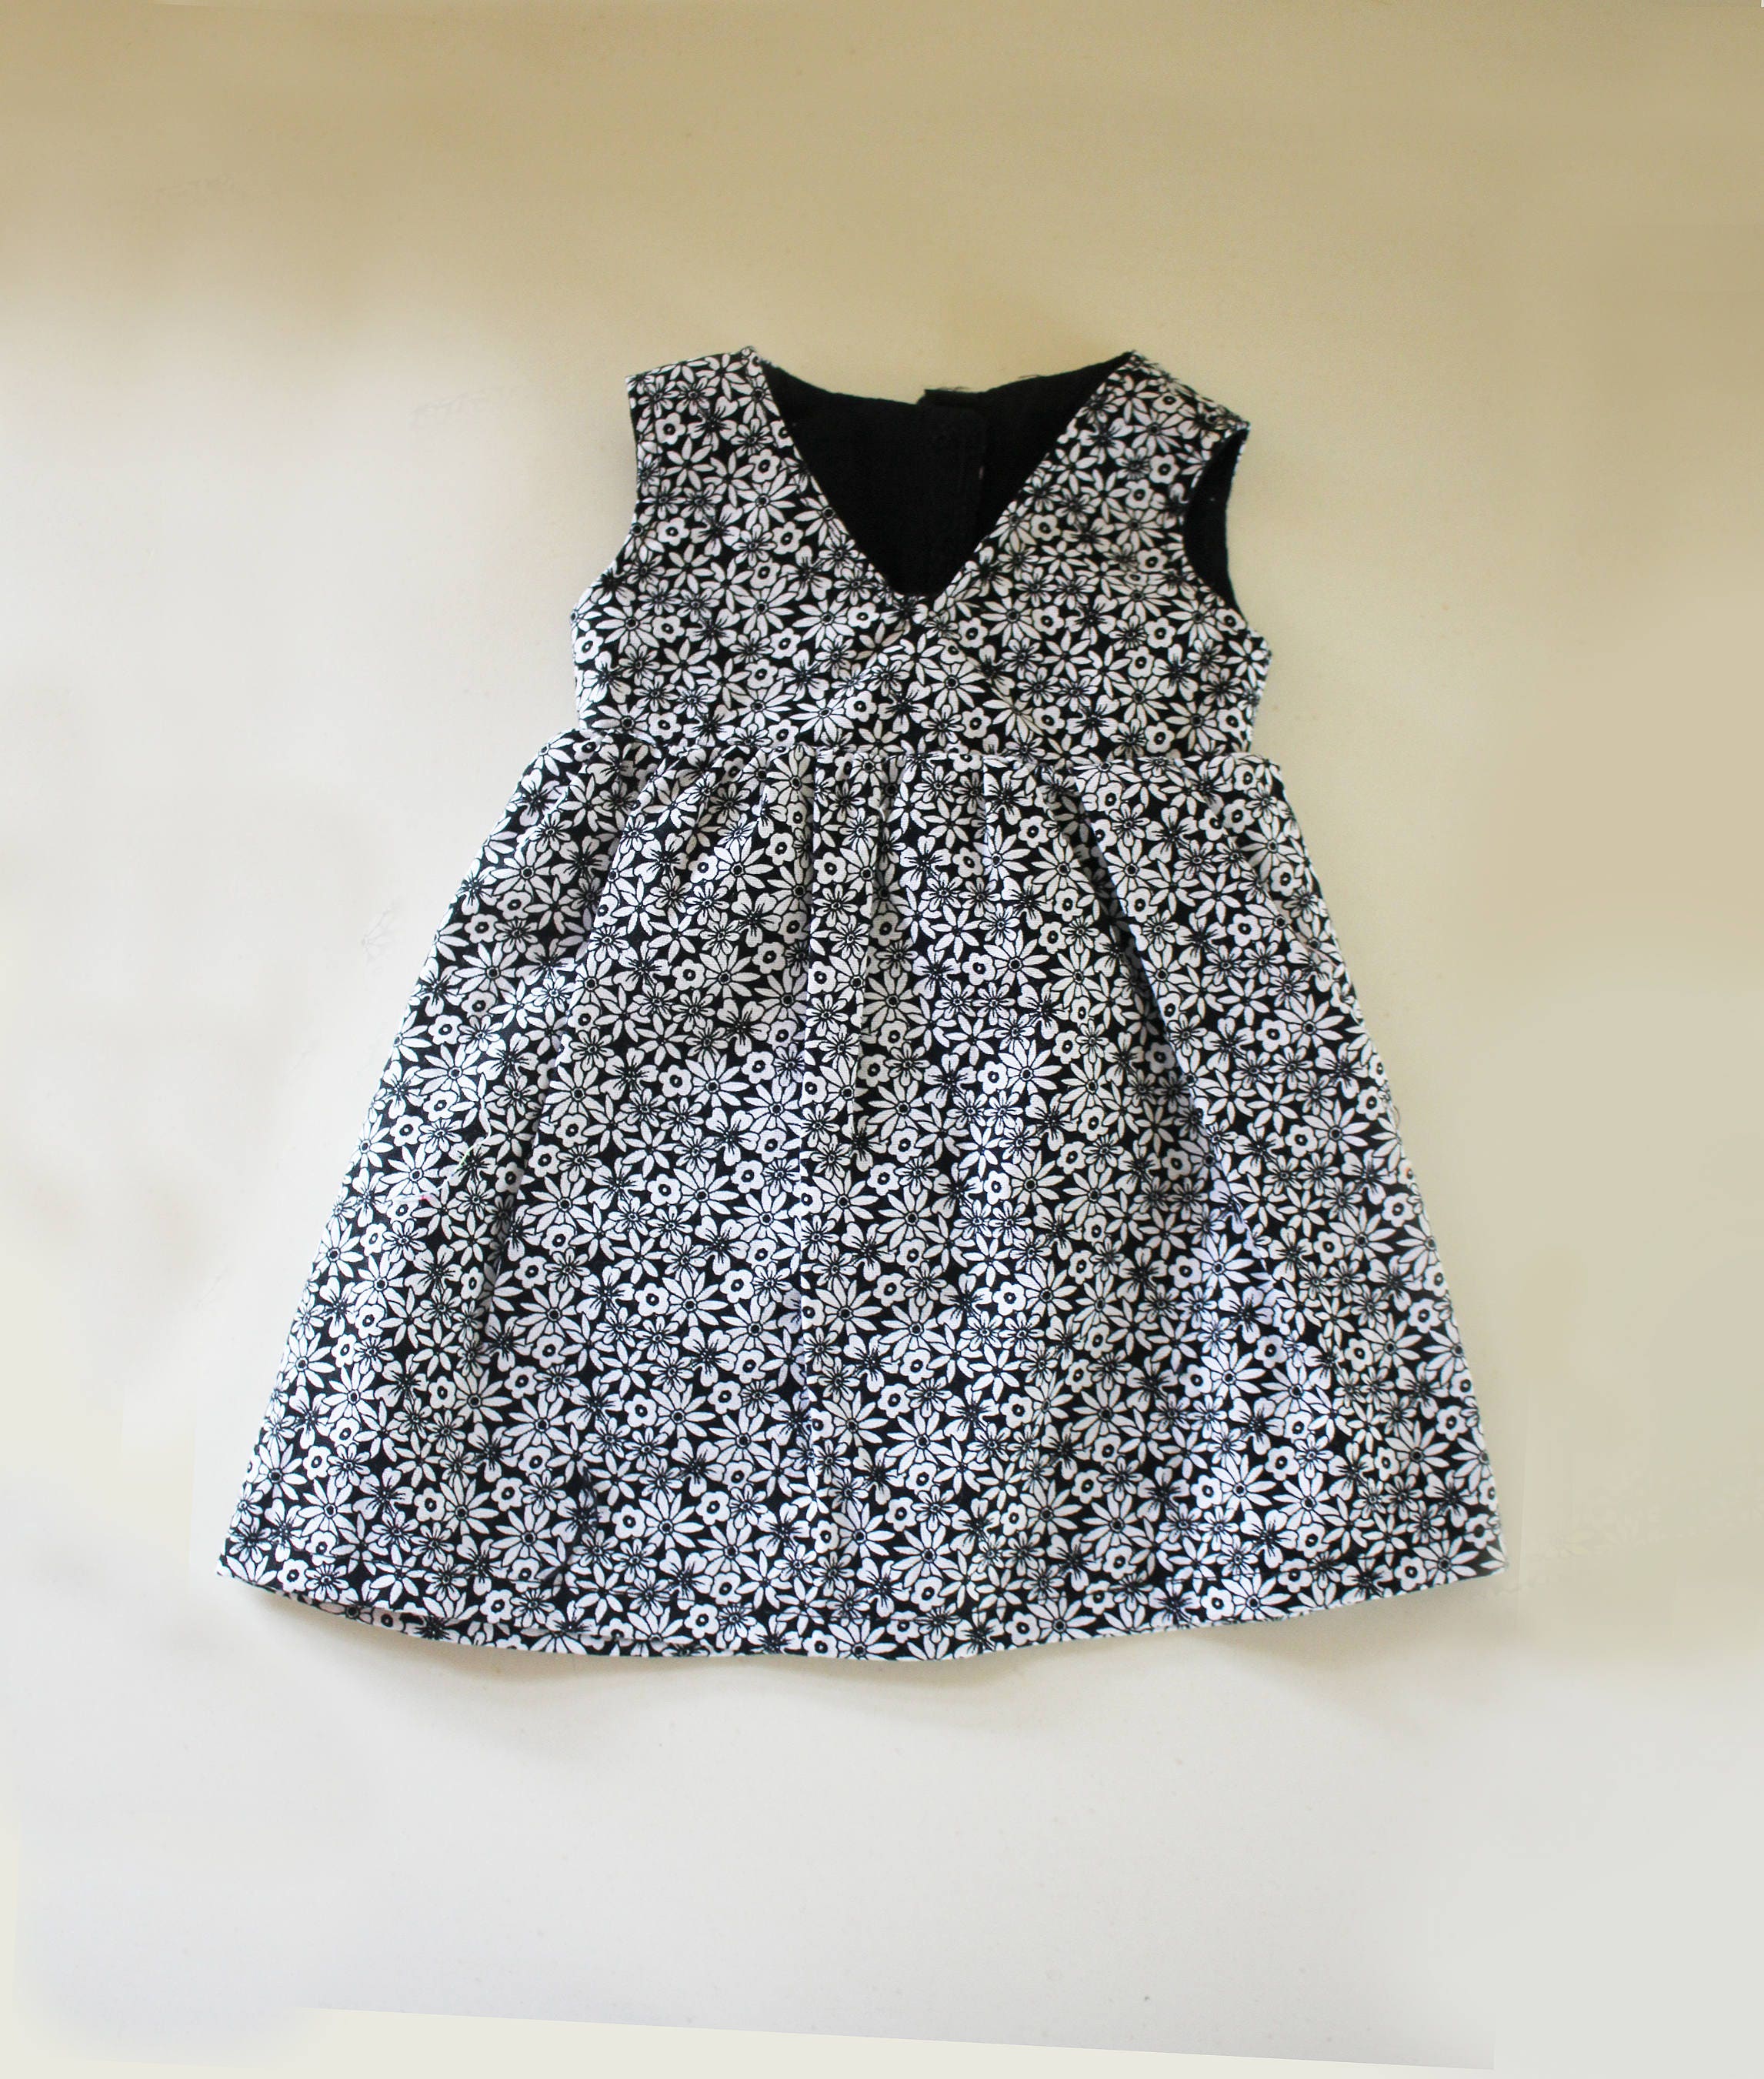 Black and White Floral Dress for 18 Inch Dolls Fits American - Etsy